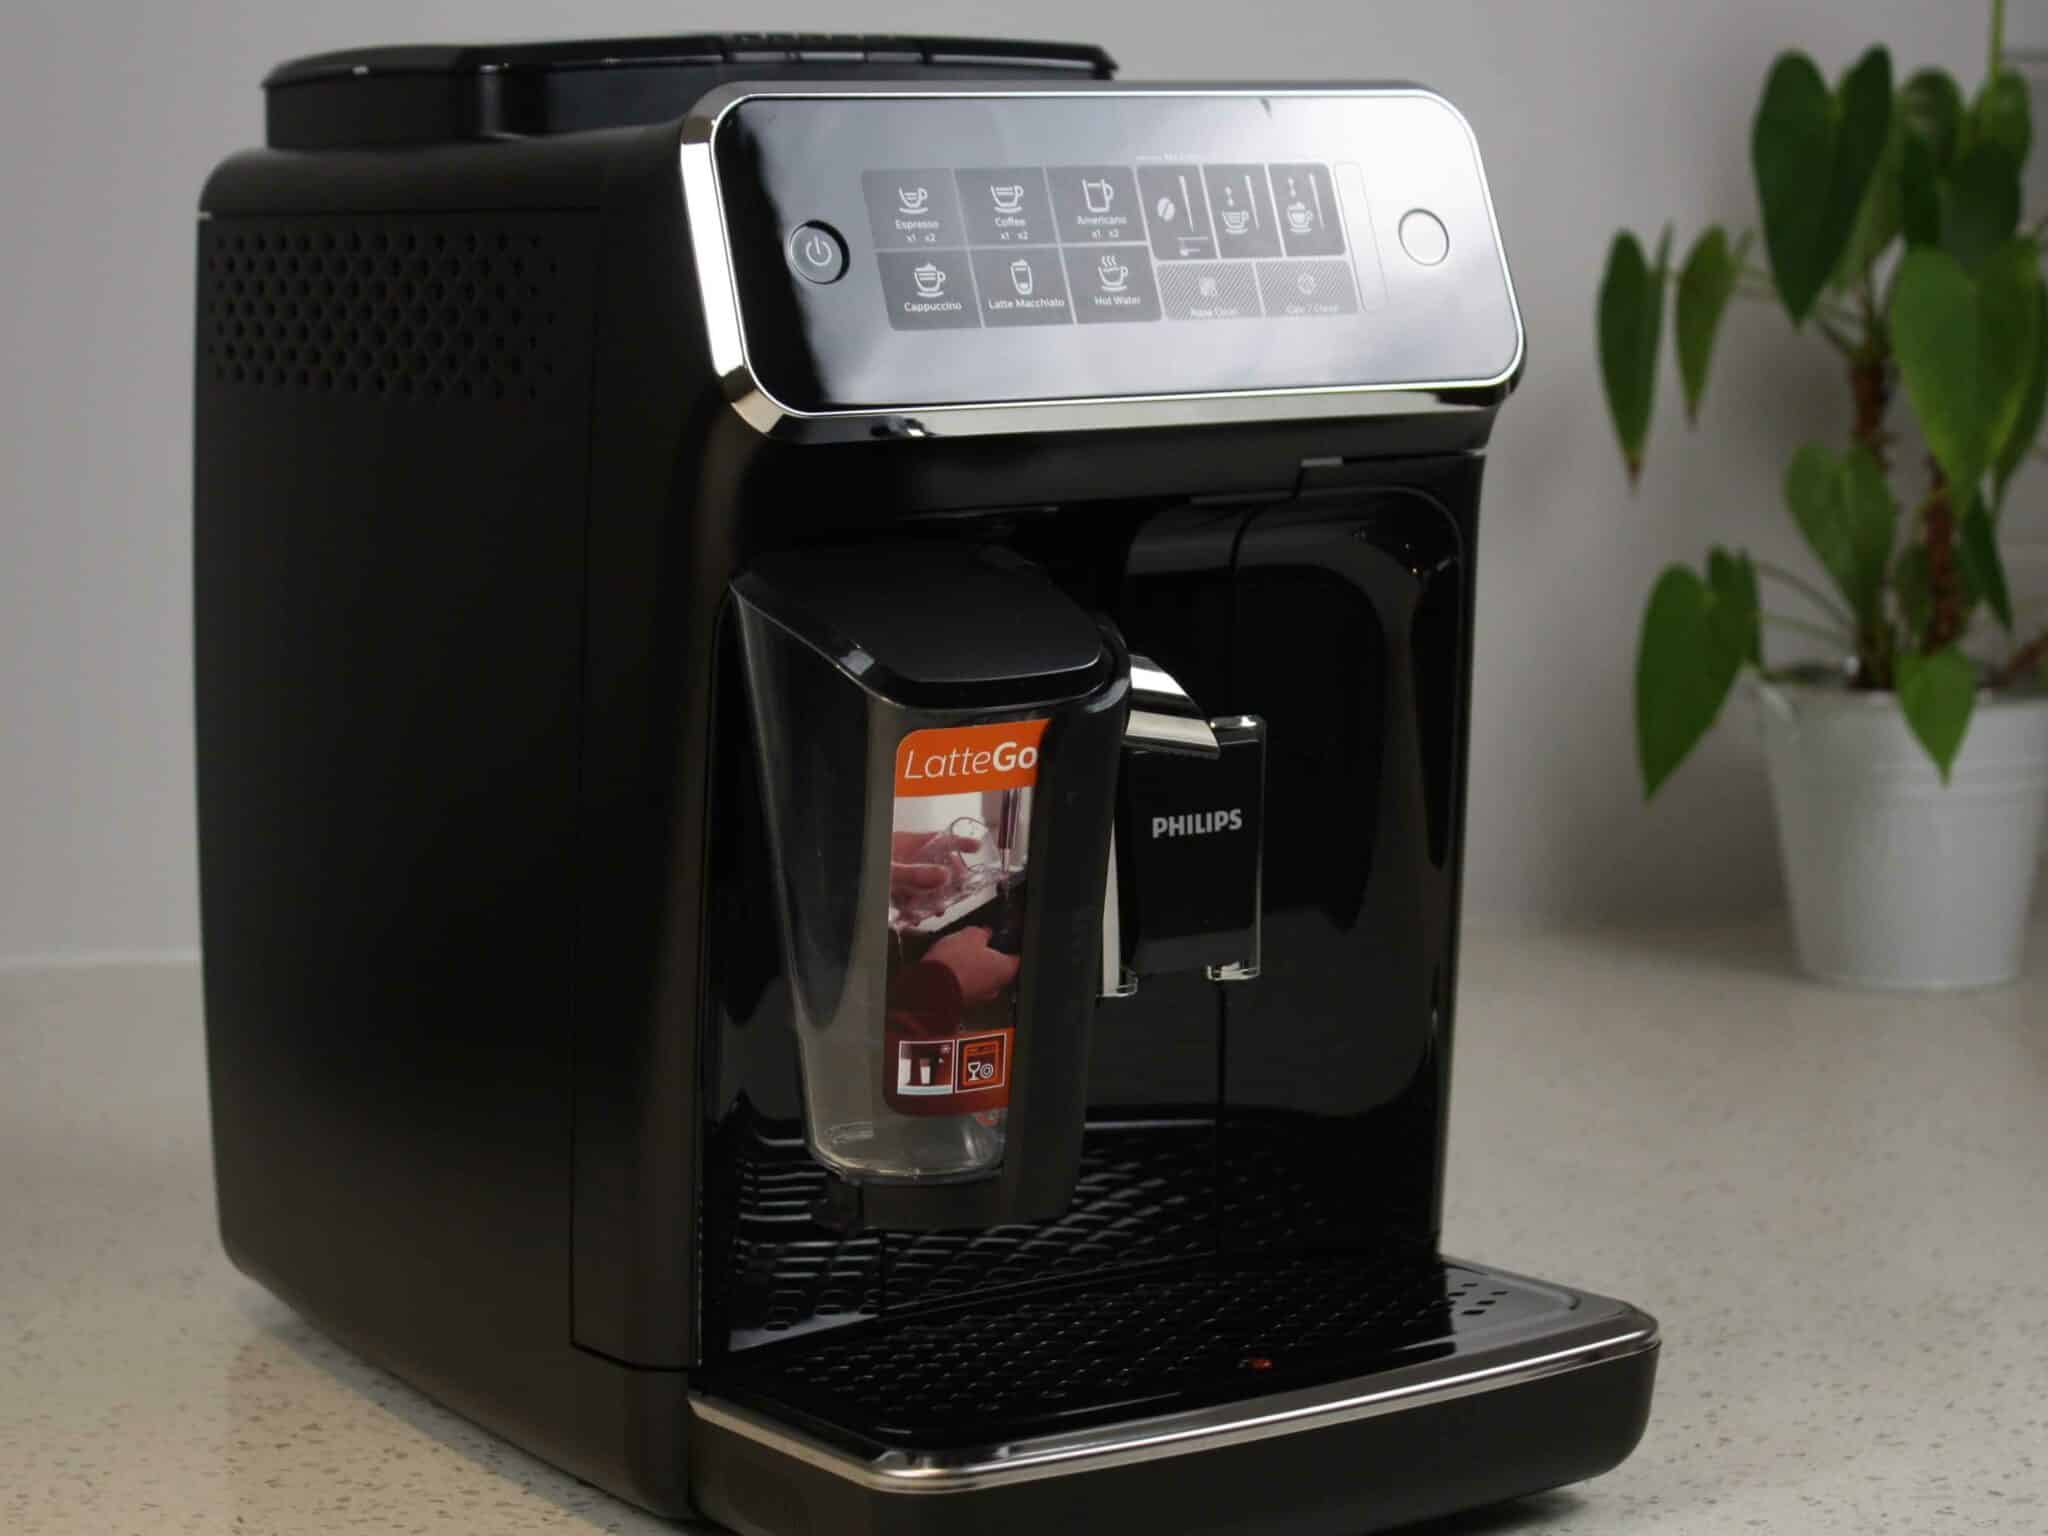 The Philips 3200 LatteGo is an excellent value purchase